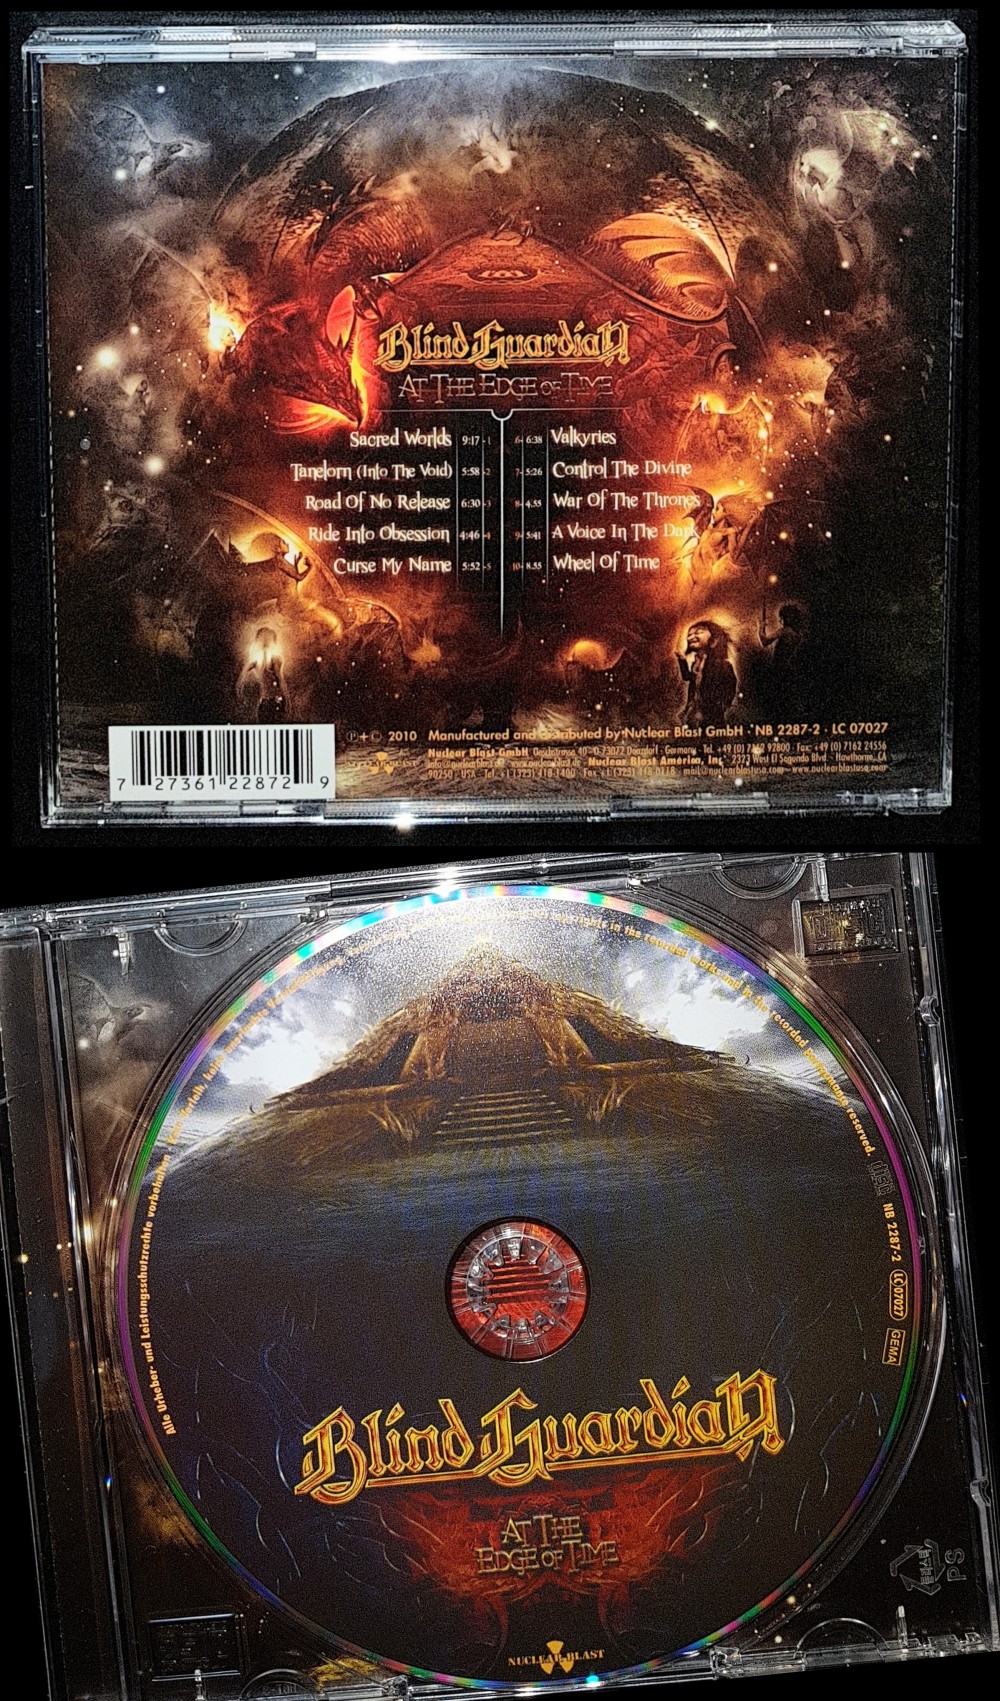 Blind Guardian - At the Edge of Time CD Photo